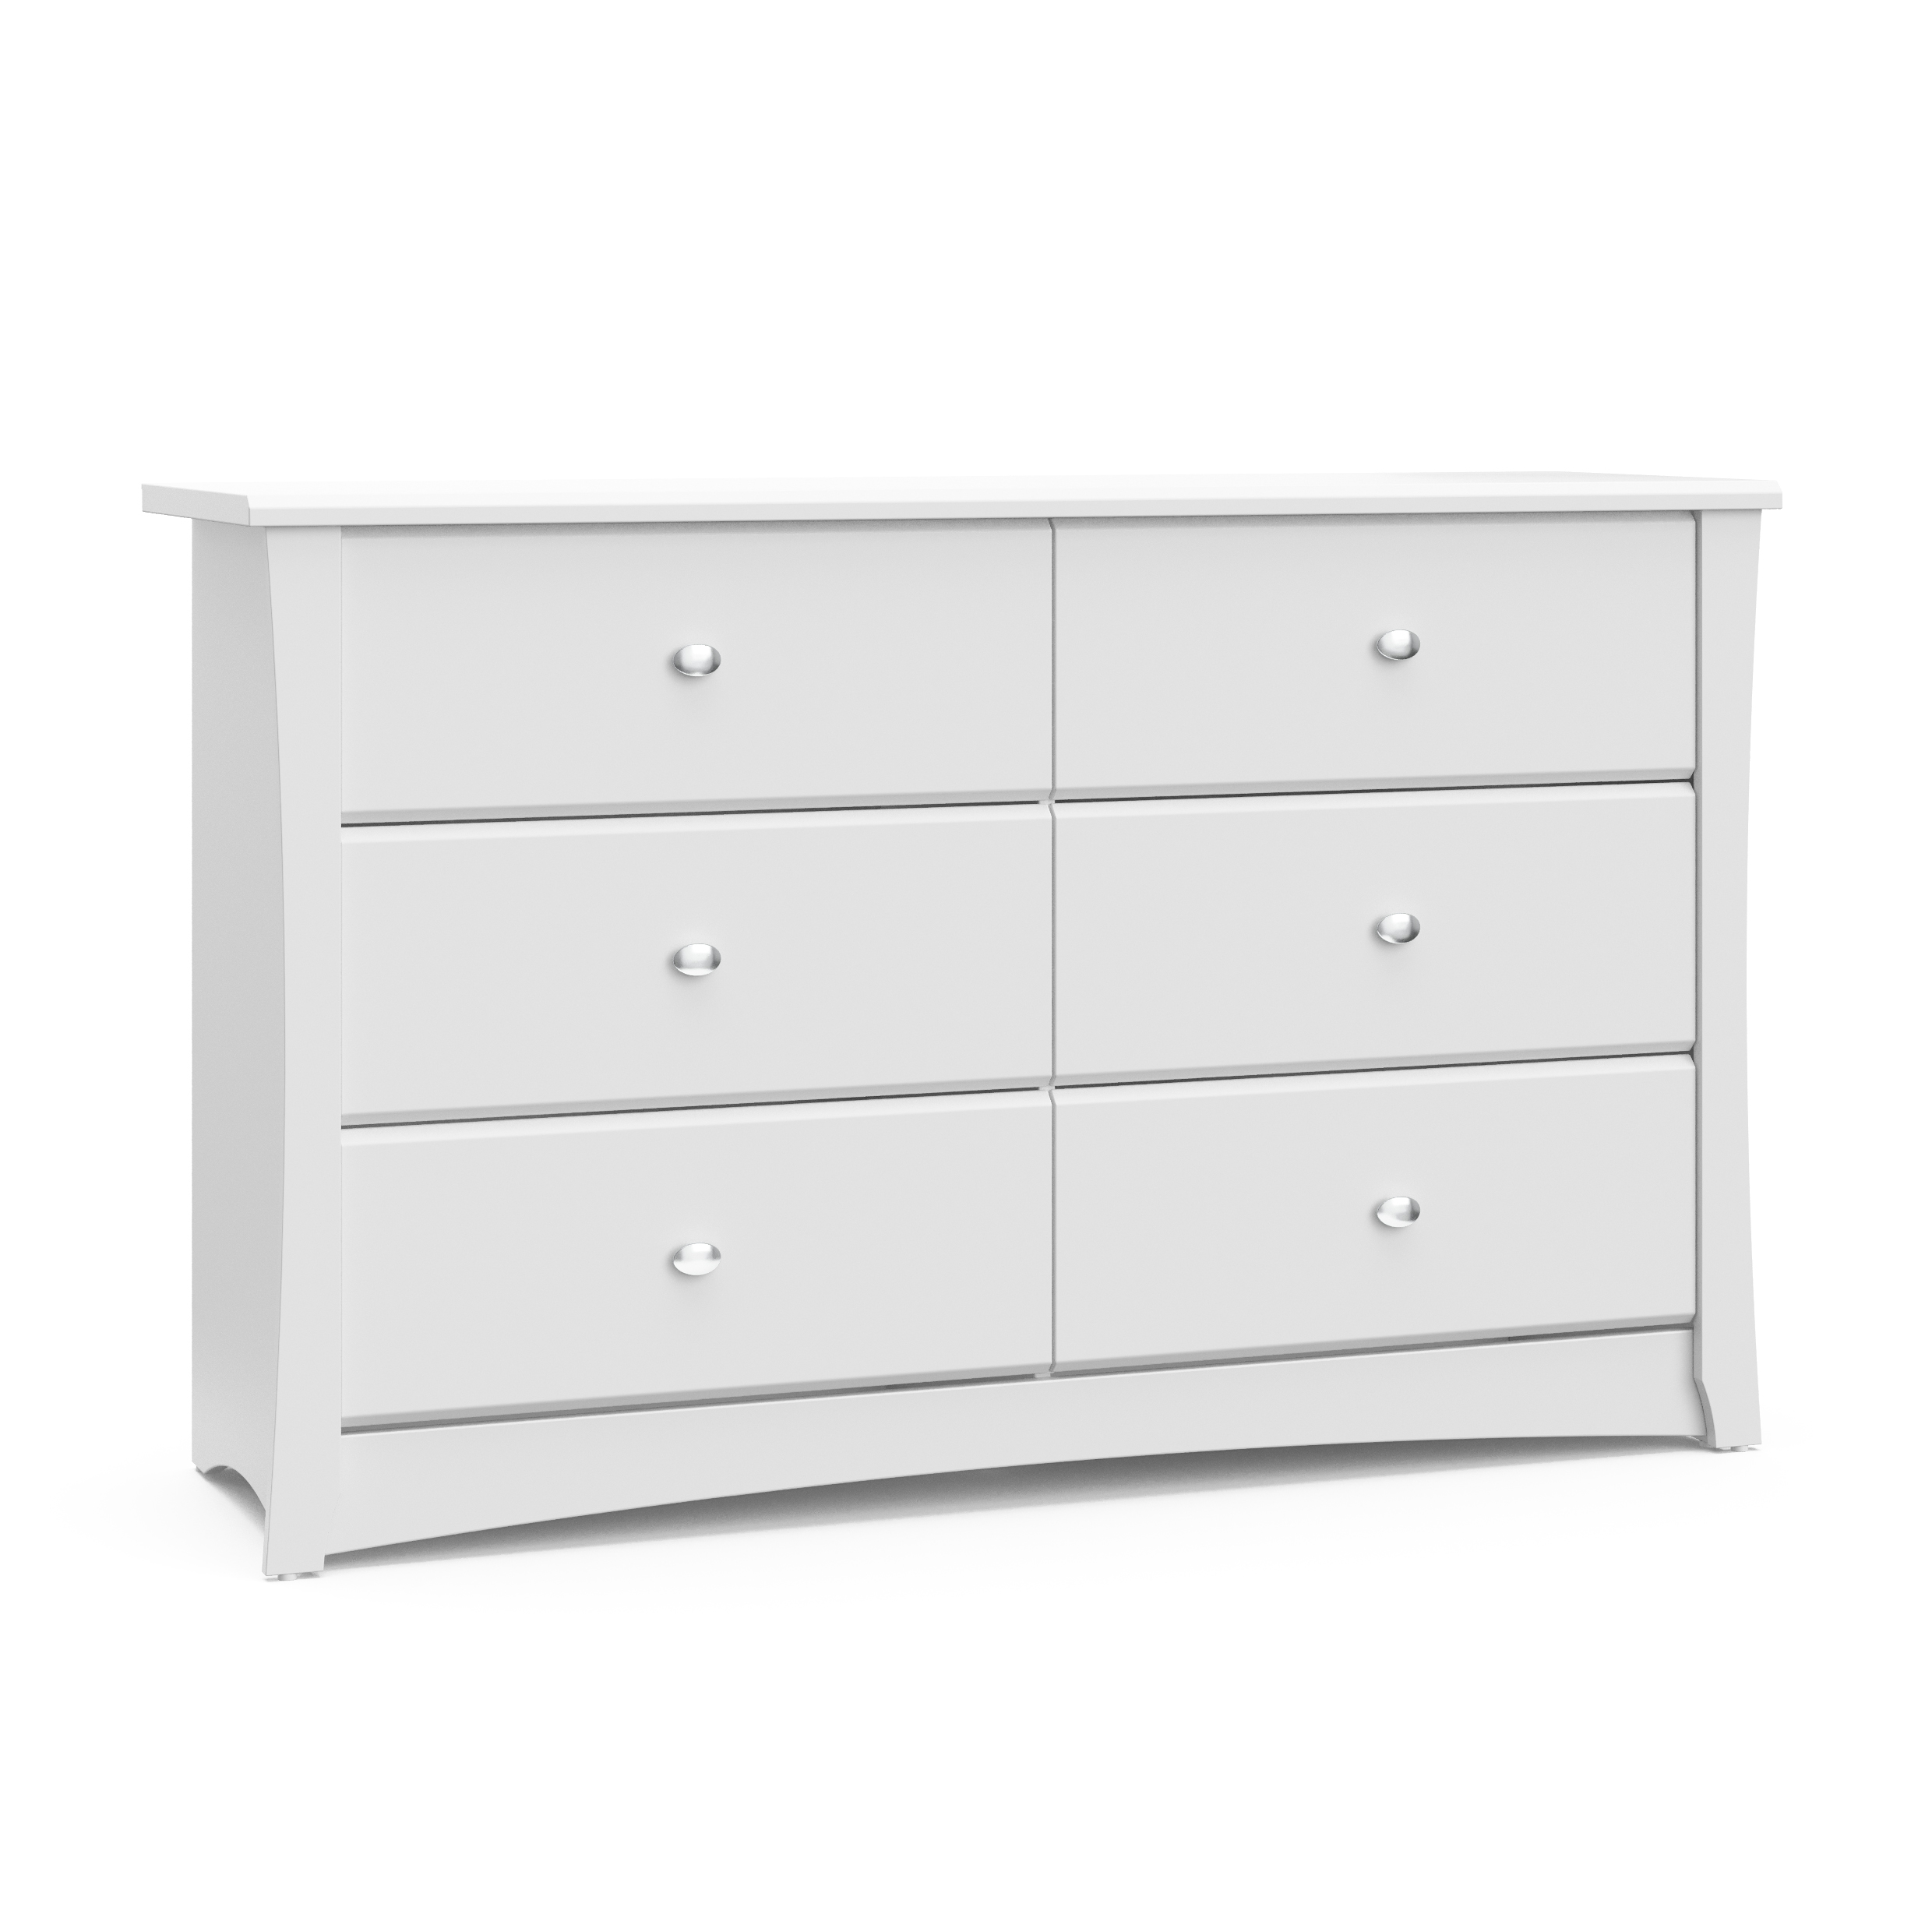 Storkcraft Crescent 6 Drawer Kids and Baby Double Dresser White - image 1 of 14